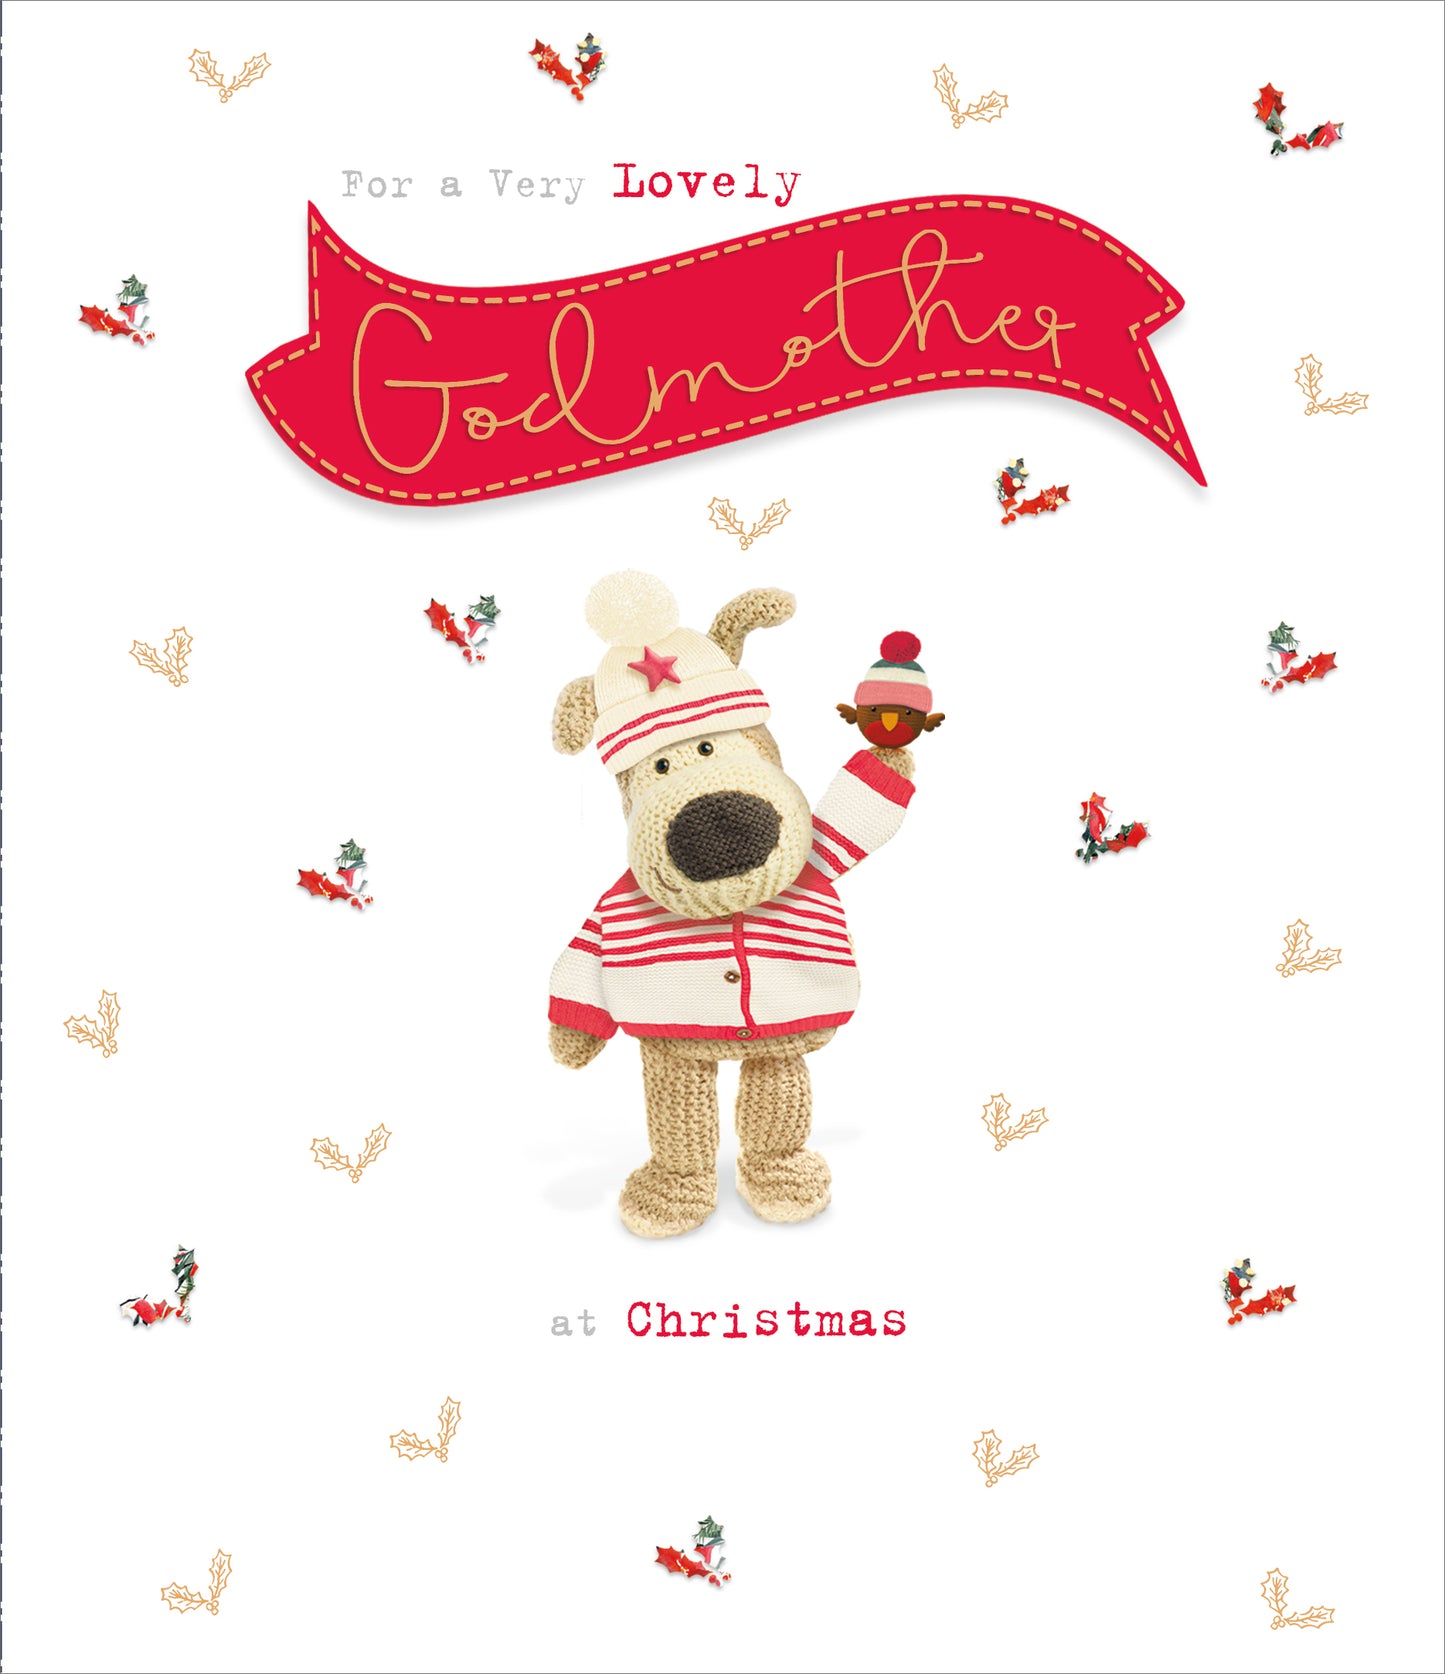 Boofle Lovely Godmother Festive Robin Christmas Greeting Card